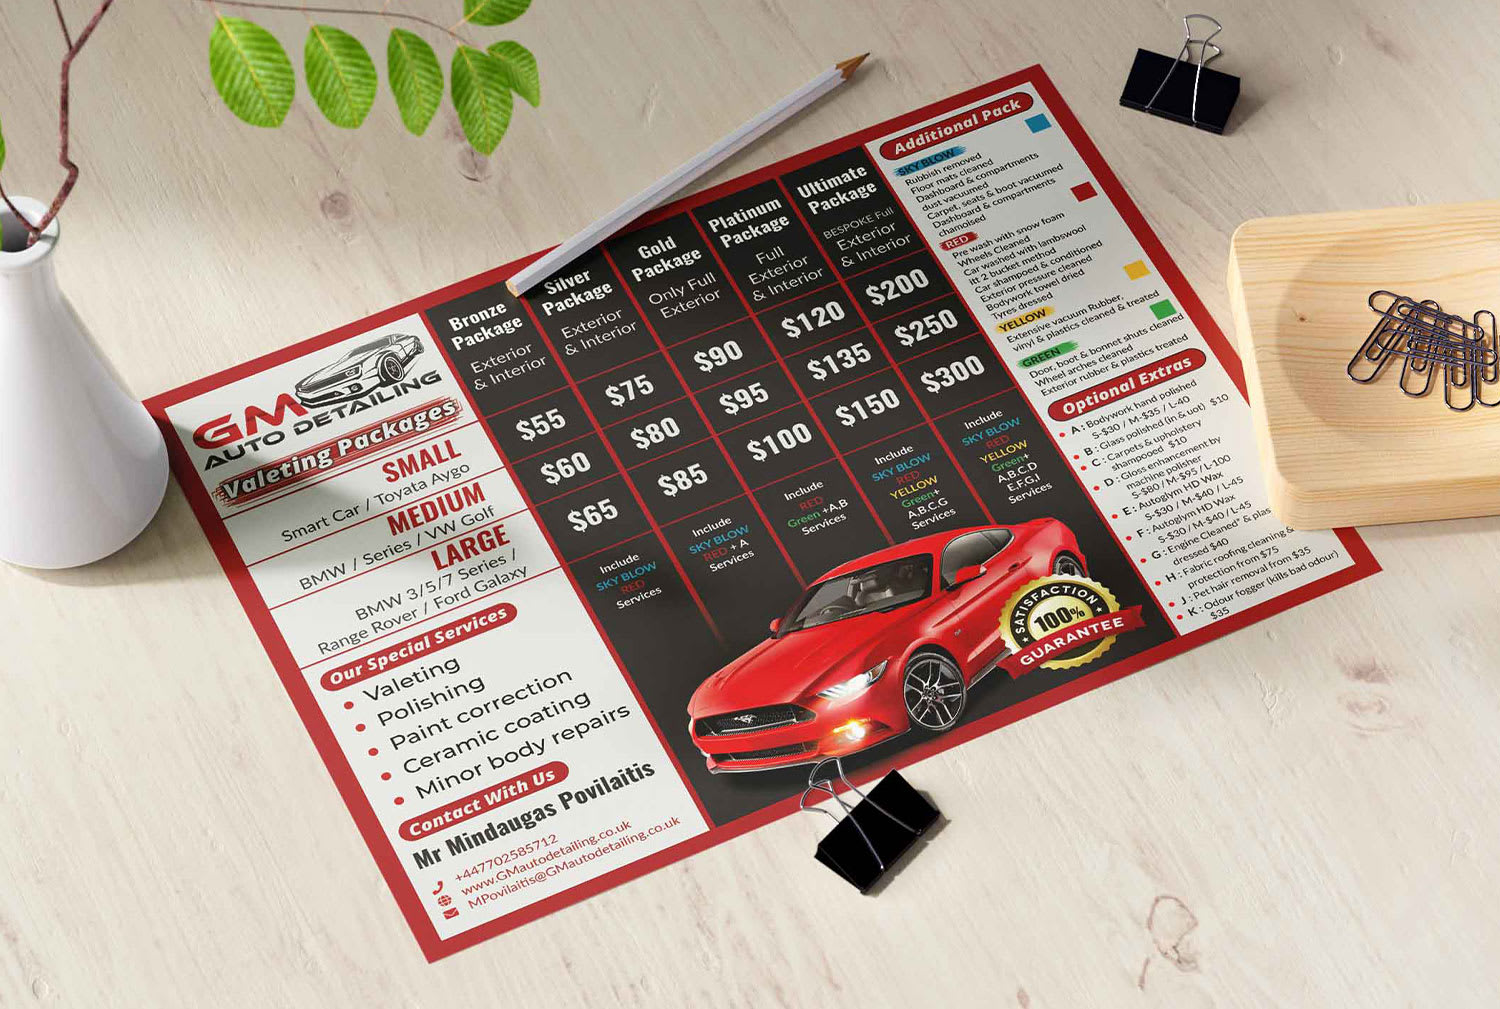 Free Modern Car Detailing Price List template to design